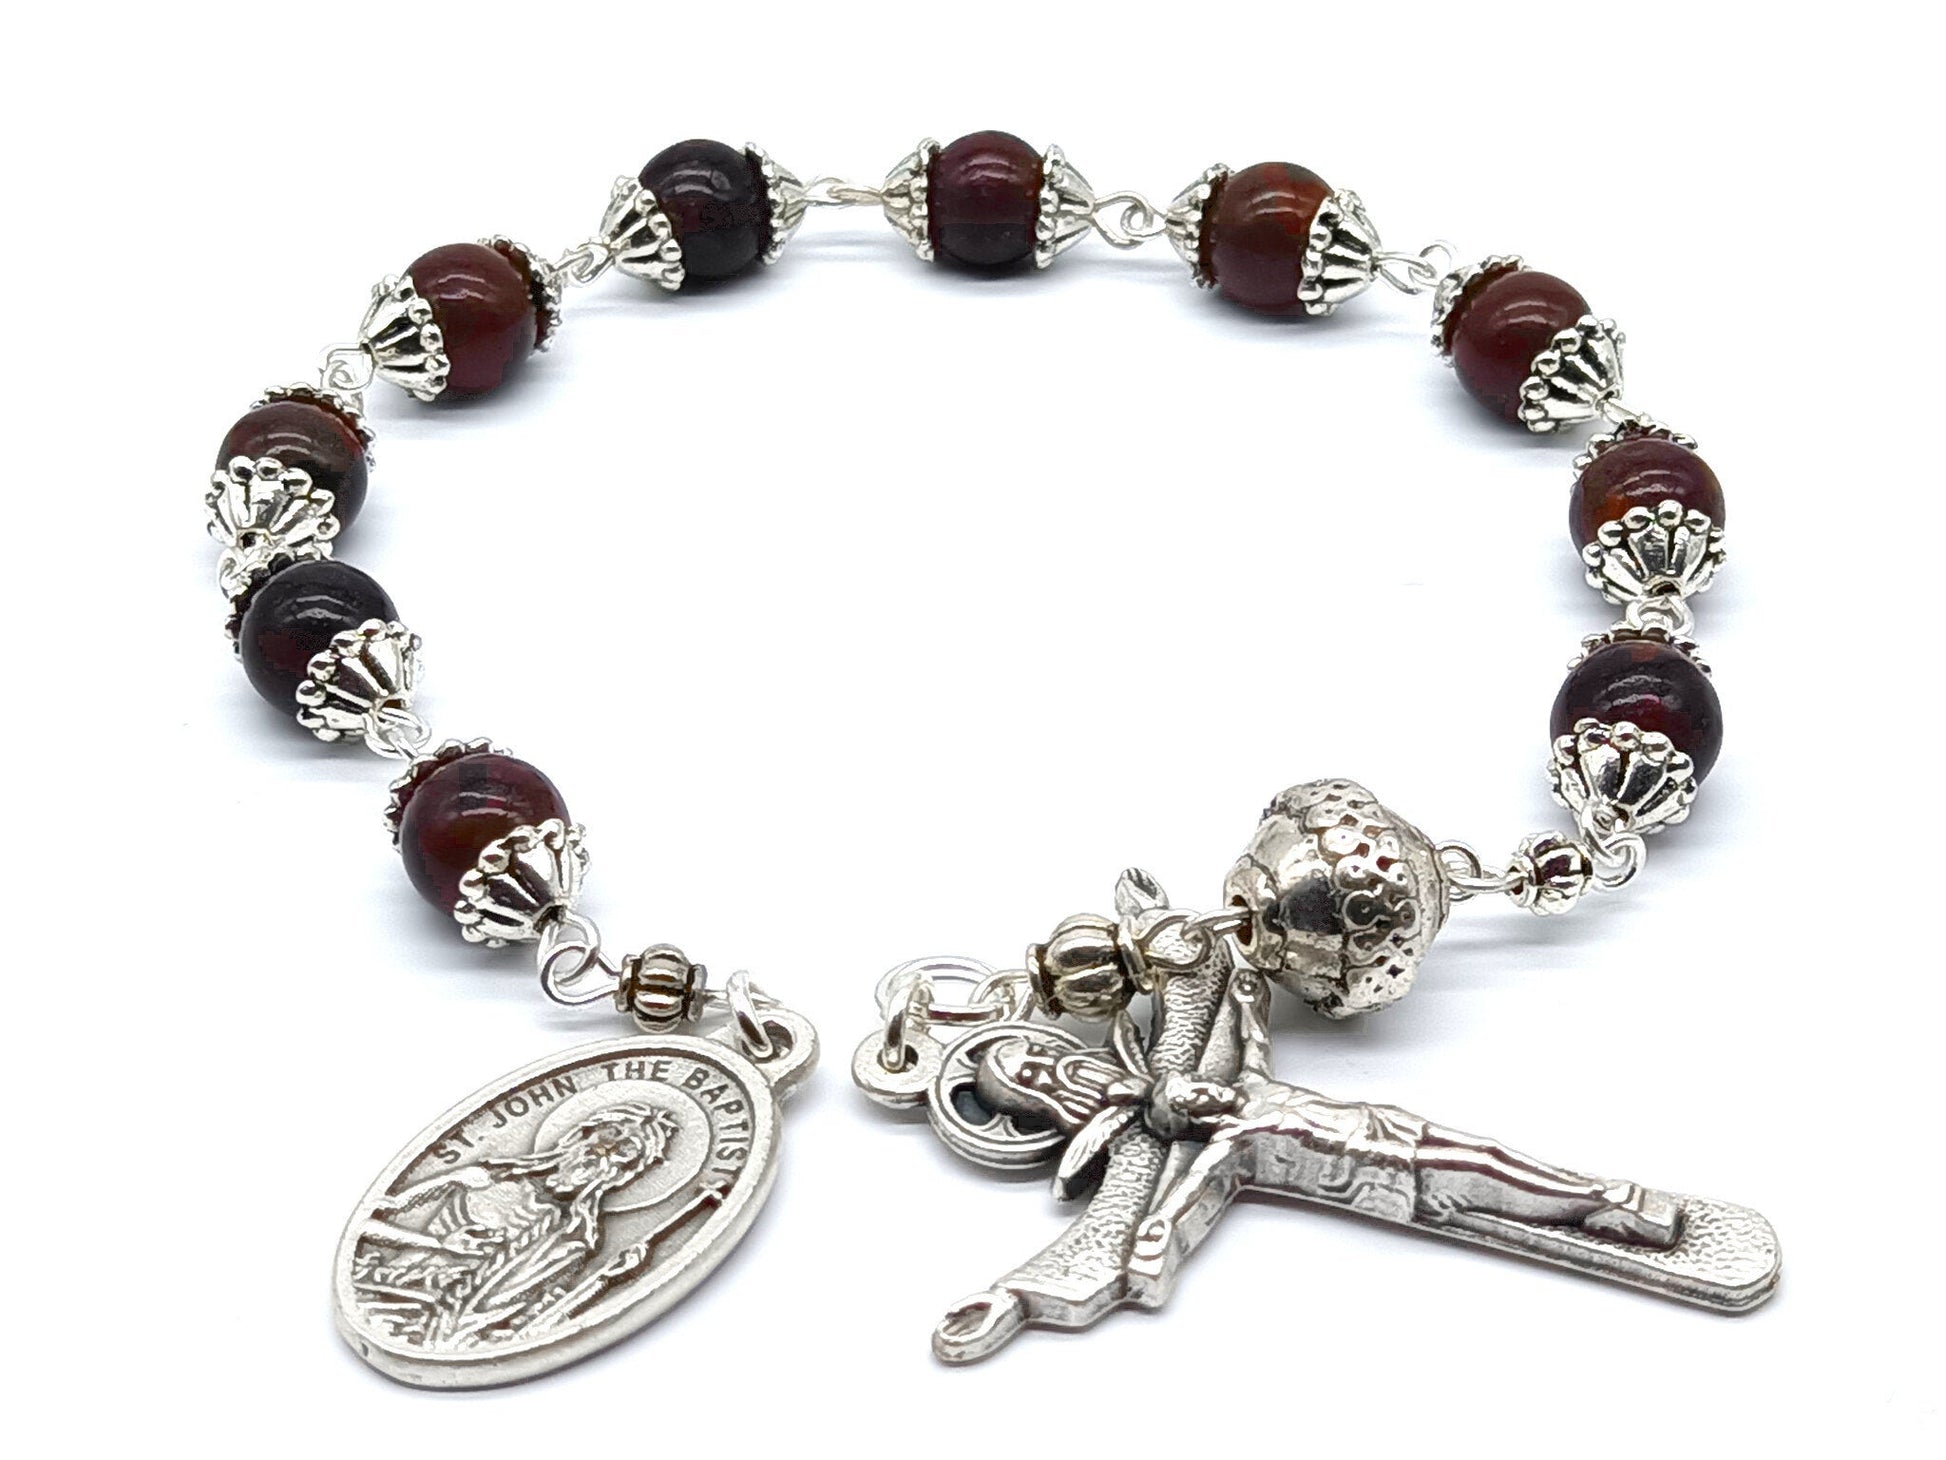 Saint John the Baptist unique rosary beads single decade with bloodstone gemstone beads, silver Trinity crucifix and St. John the Baptist medal.